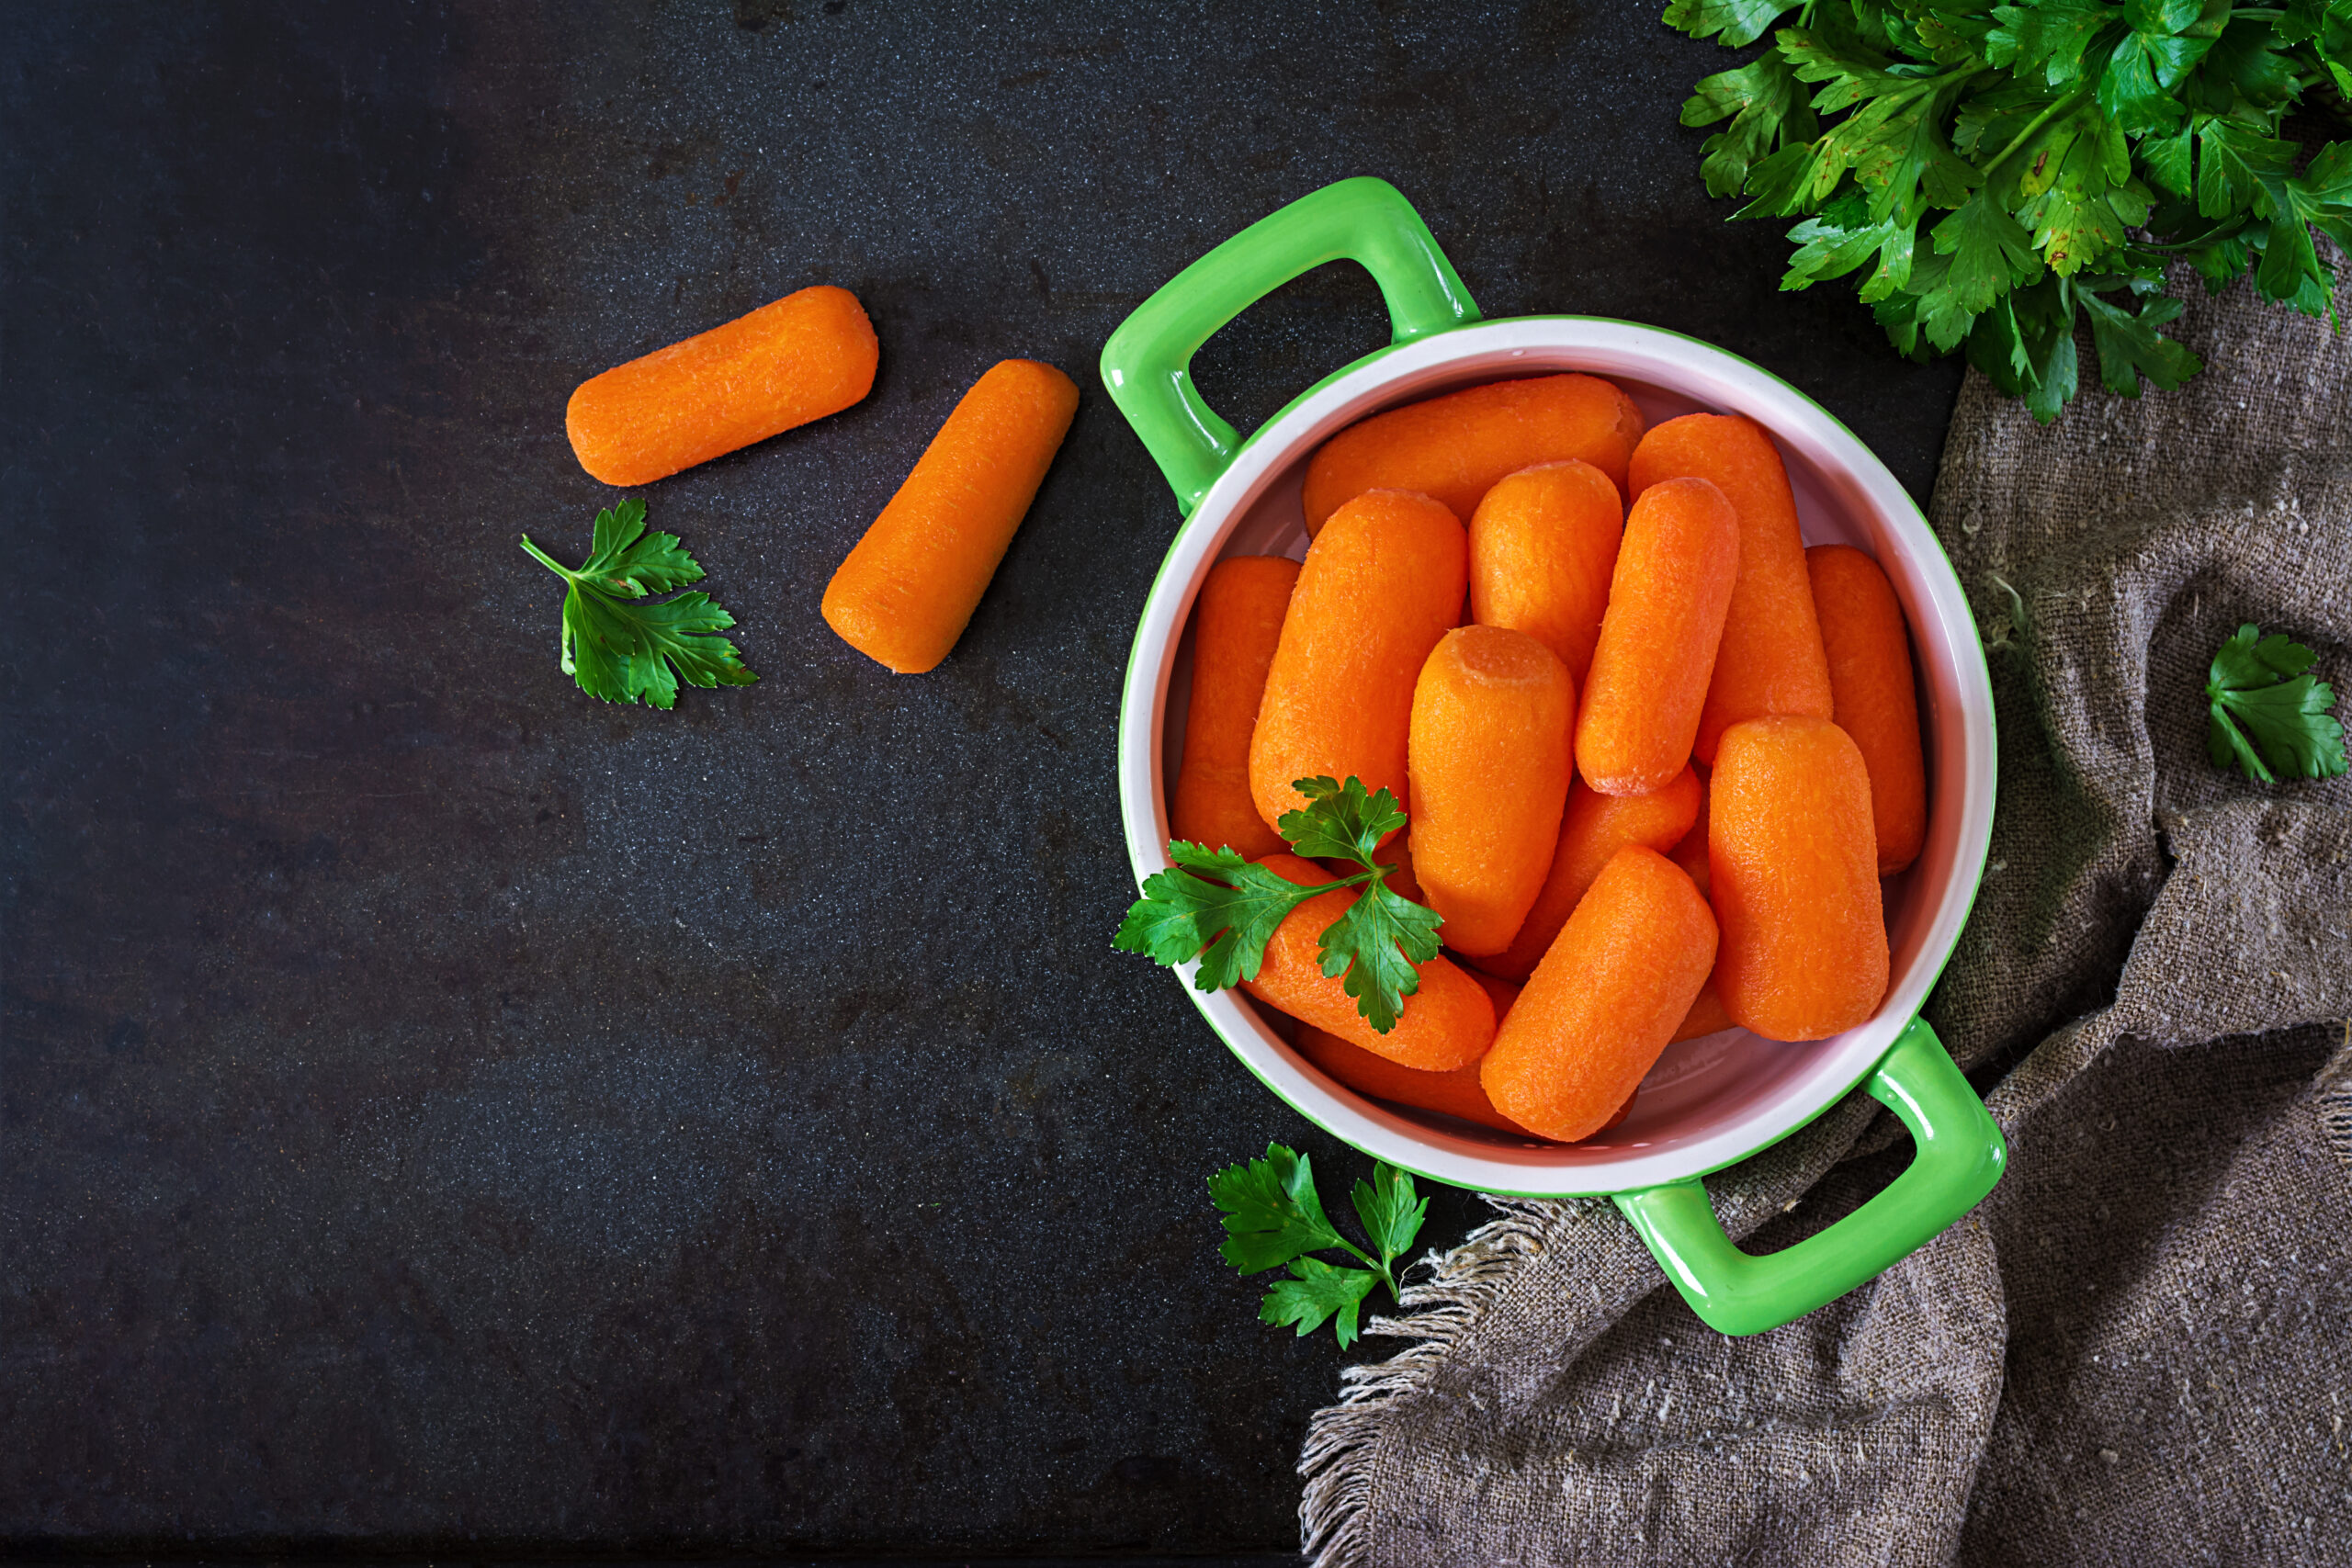 How long to Cook Baby Carrots